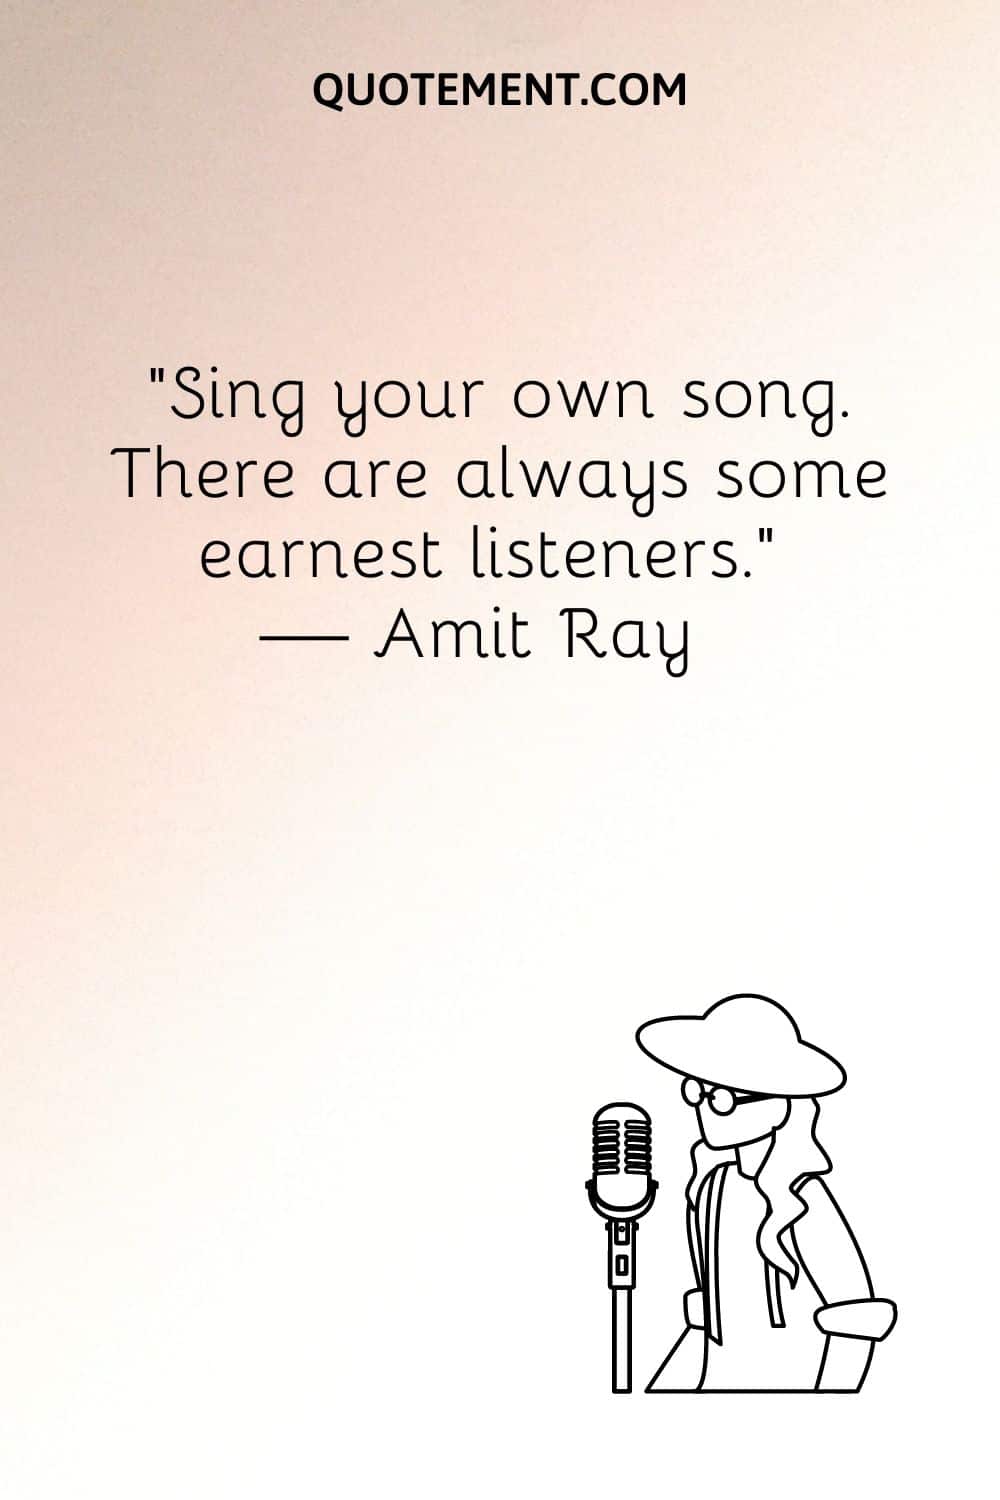 “Sing your own song. There are always some earnest listeners.” — Amit Ray